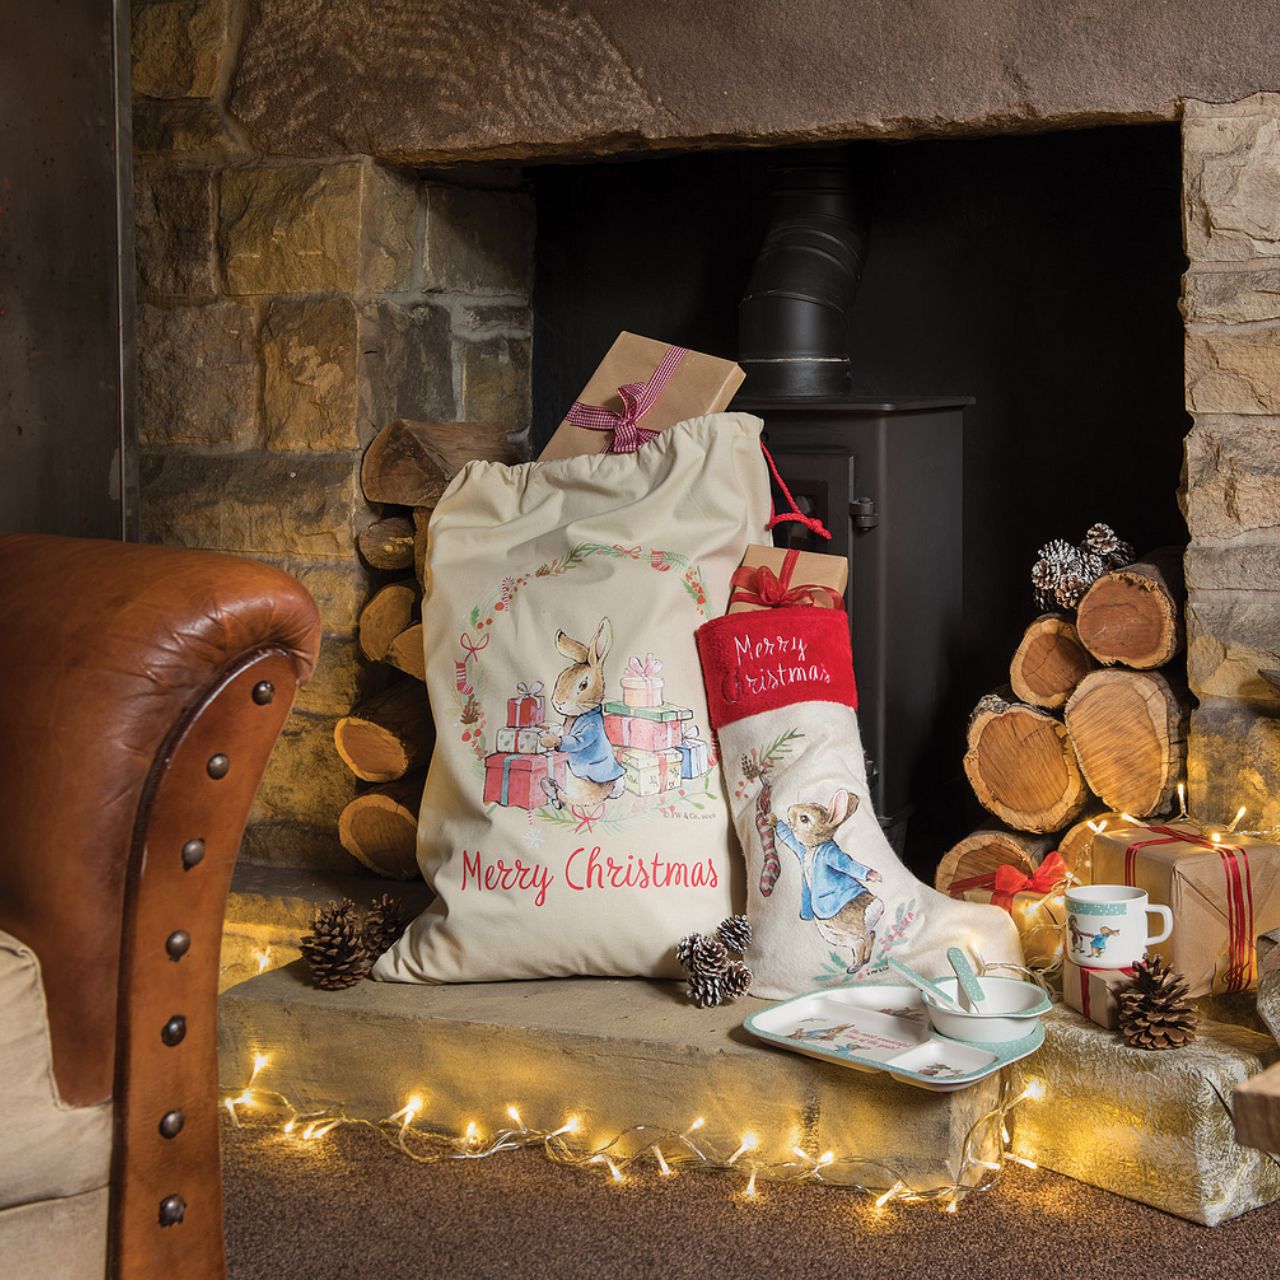 Peter Rabbit Christmas Sack  This Charming Peter Rabbit Christmas sack makes a brilliant alternative to a Christmas stocking, so why not make a new tradition this Christmas. Made of 100% cotton, this Christmas sack is durable and can be used year after year. It is large enough to fit lots of presents in for Christmas morning and looks great underneath the tree. 